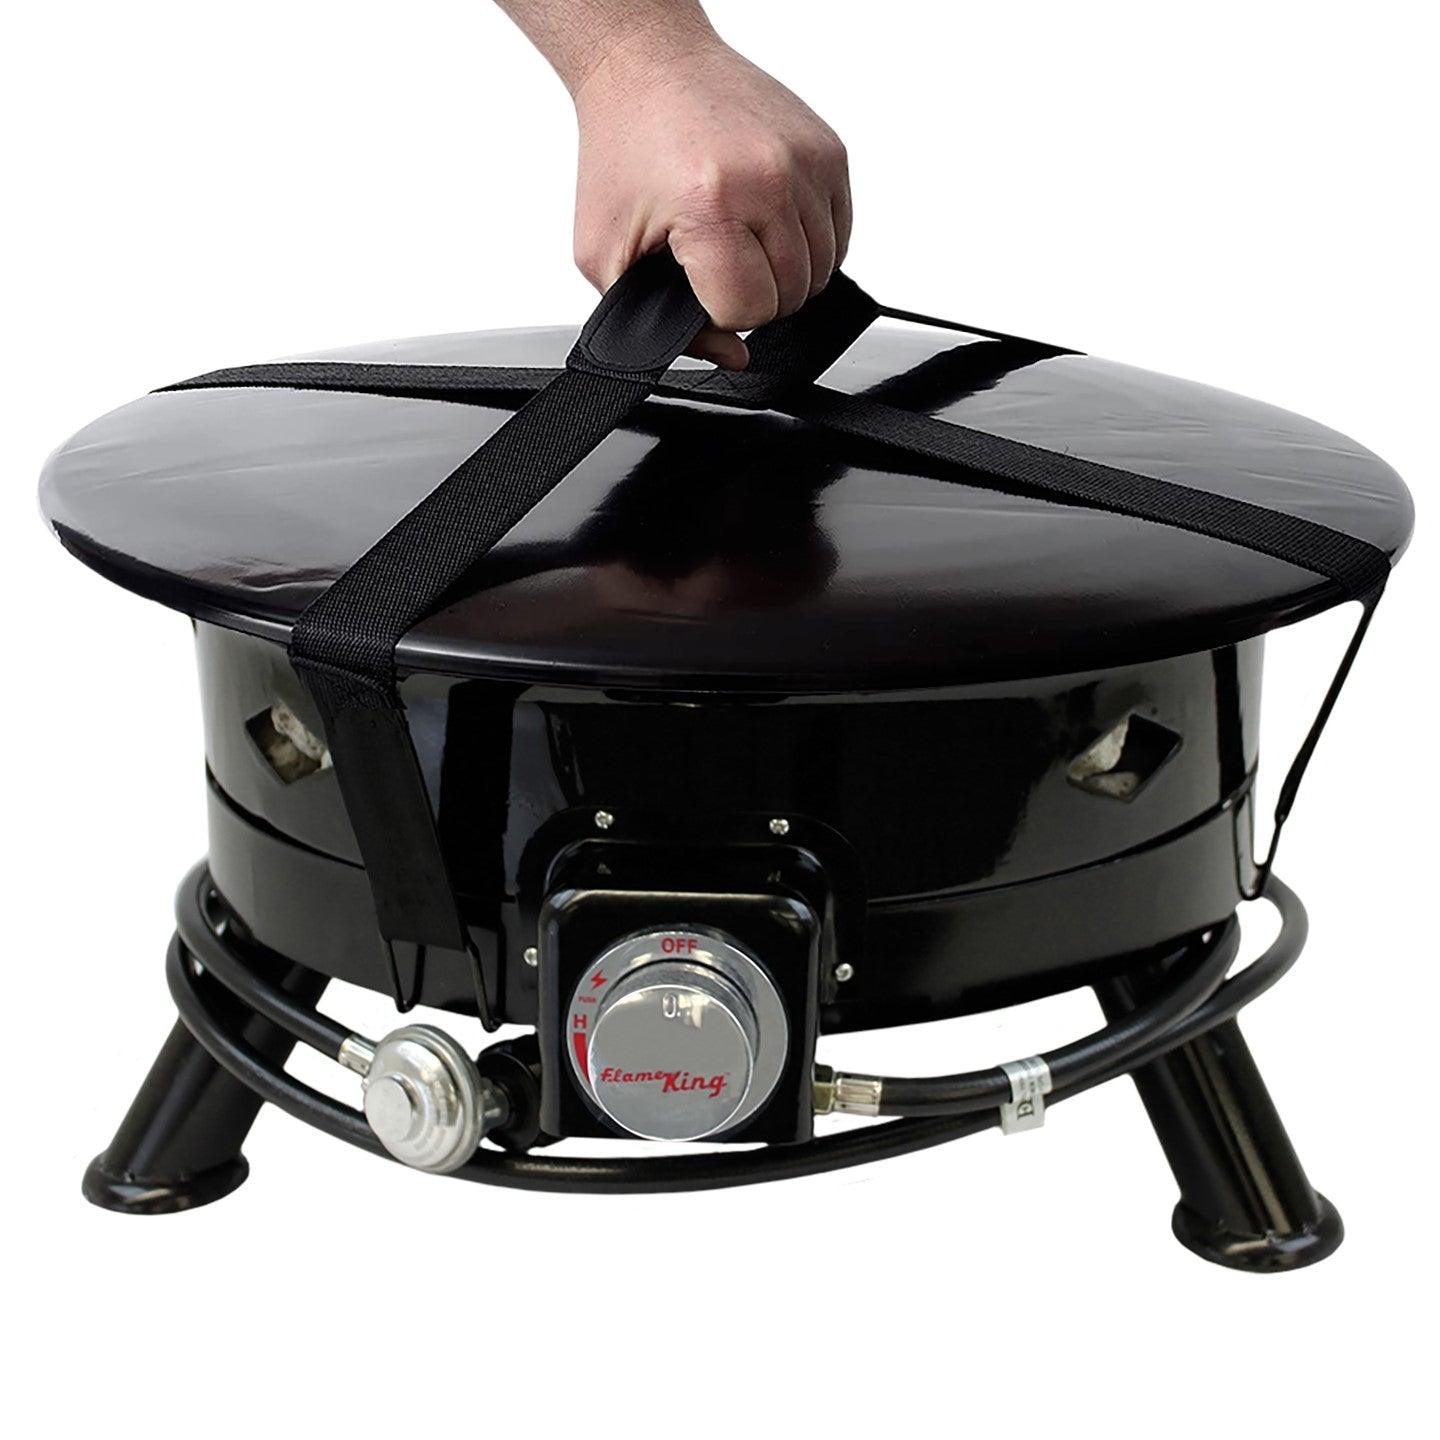 Flame King Outdoor Portable Propane Gas 24″ Fire Pit Bowl with Self Igniter, Cover, and Carry Straps - Flame King